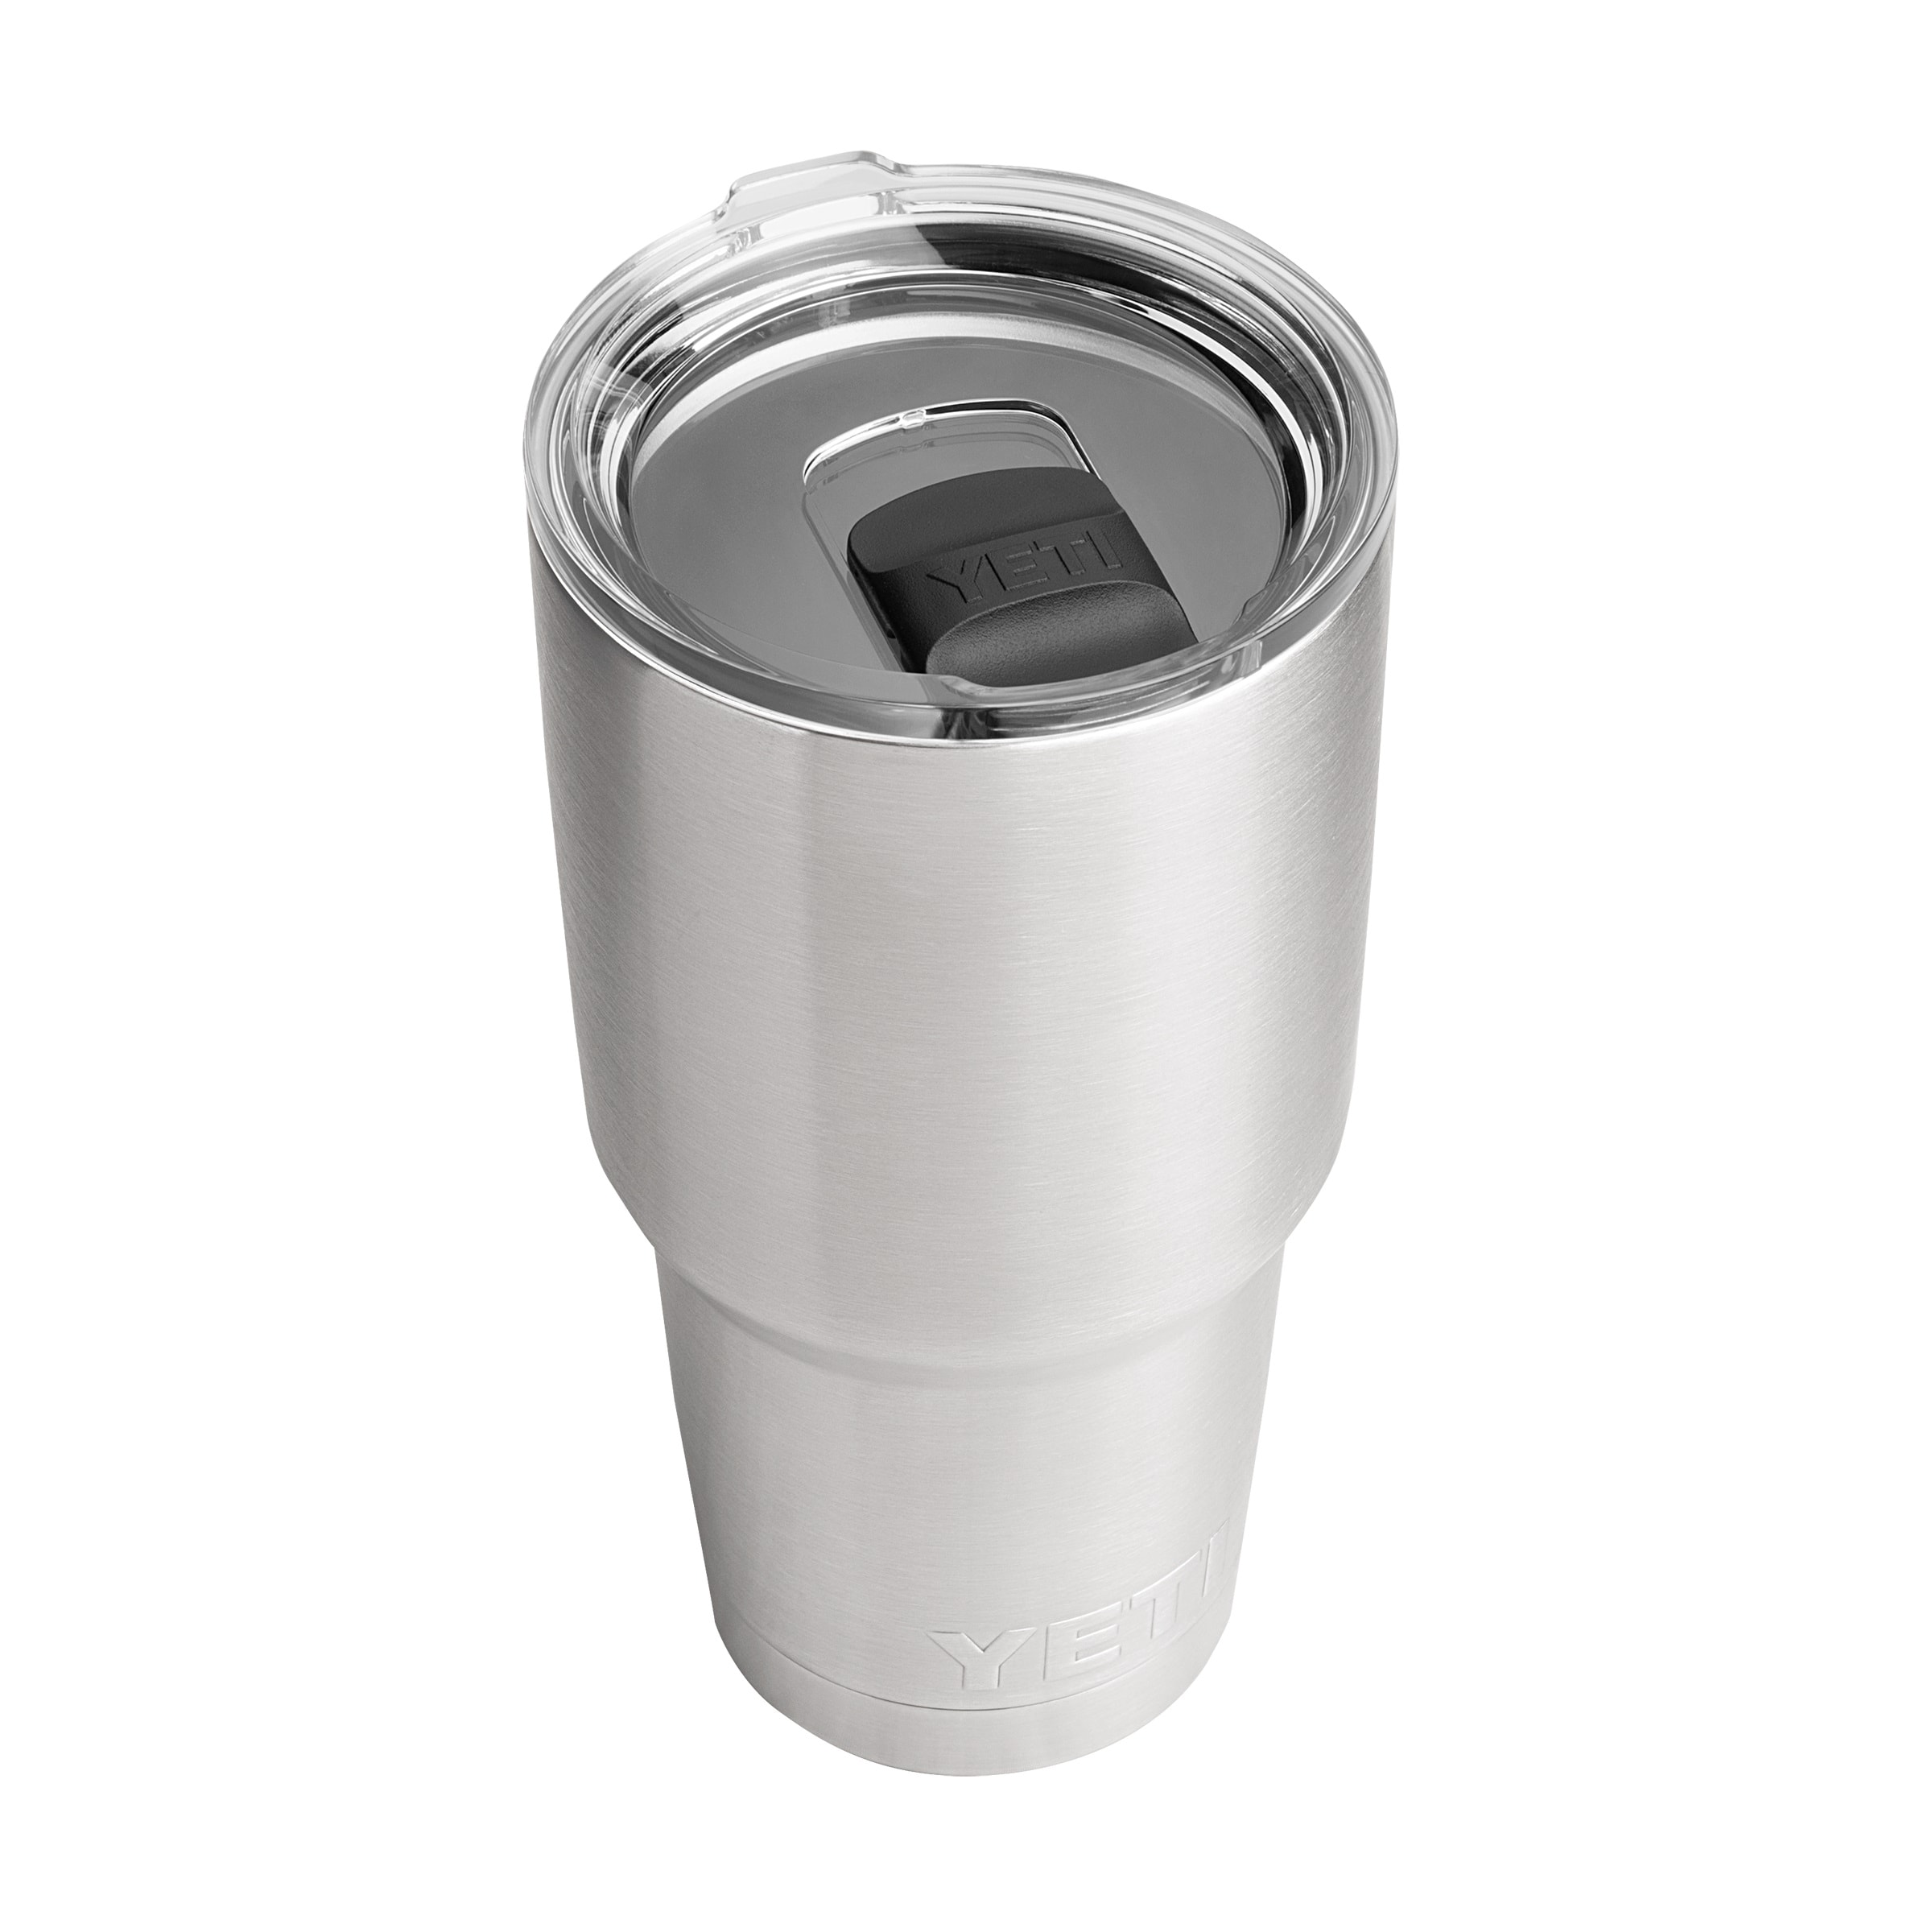 YETI Rambler 30-fl oz Stainless Steel Tumbler with MagSlider Lid at